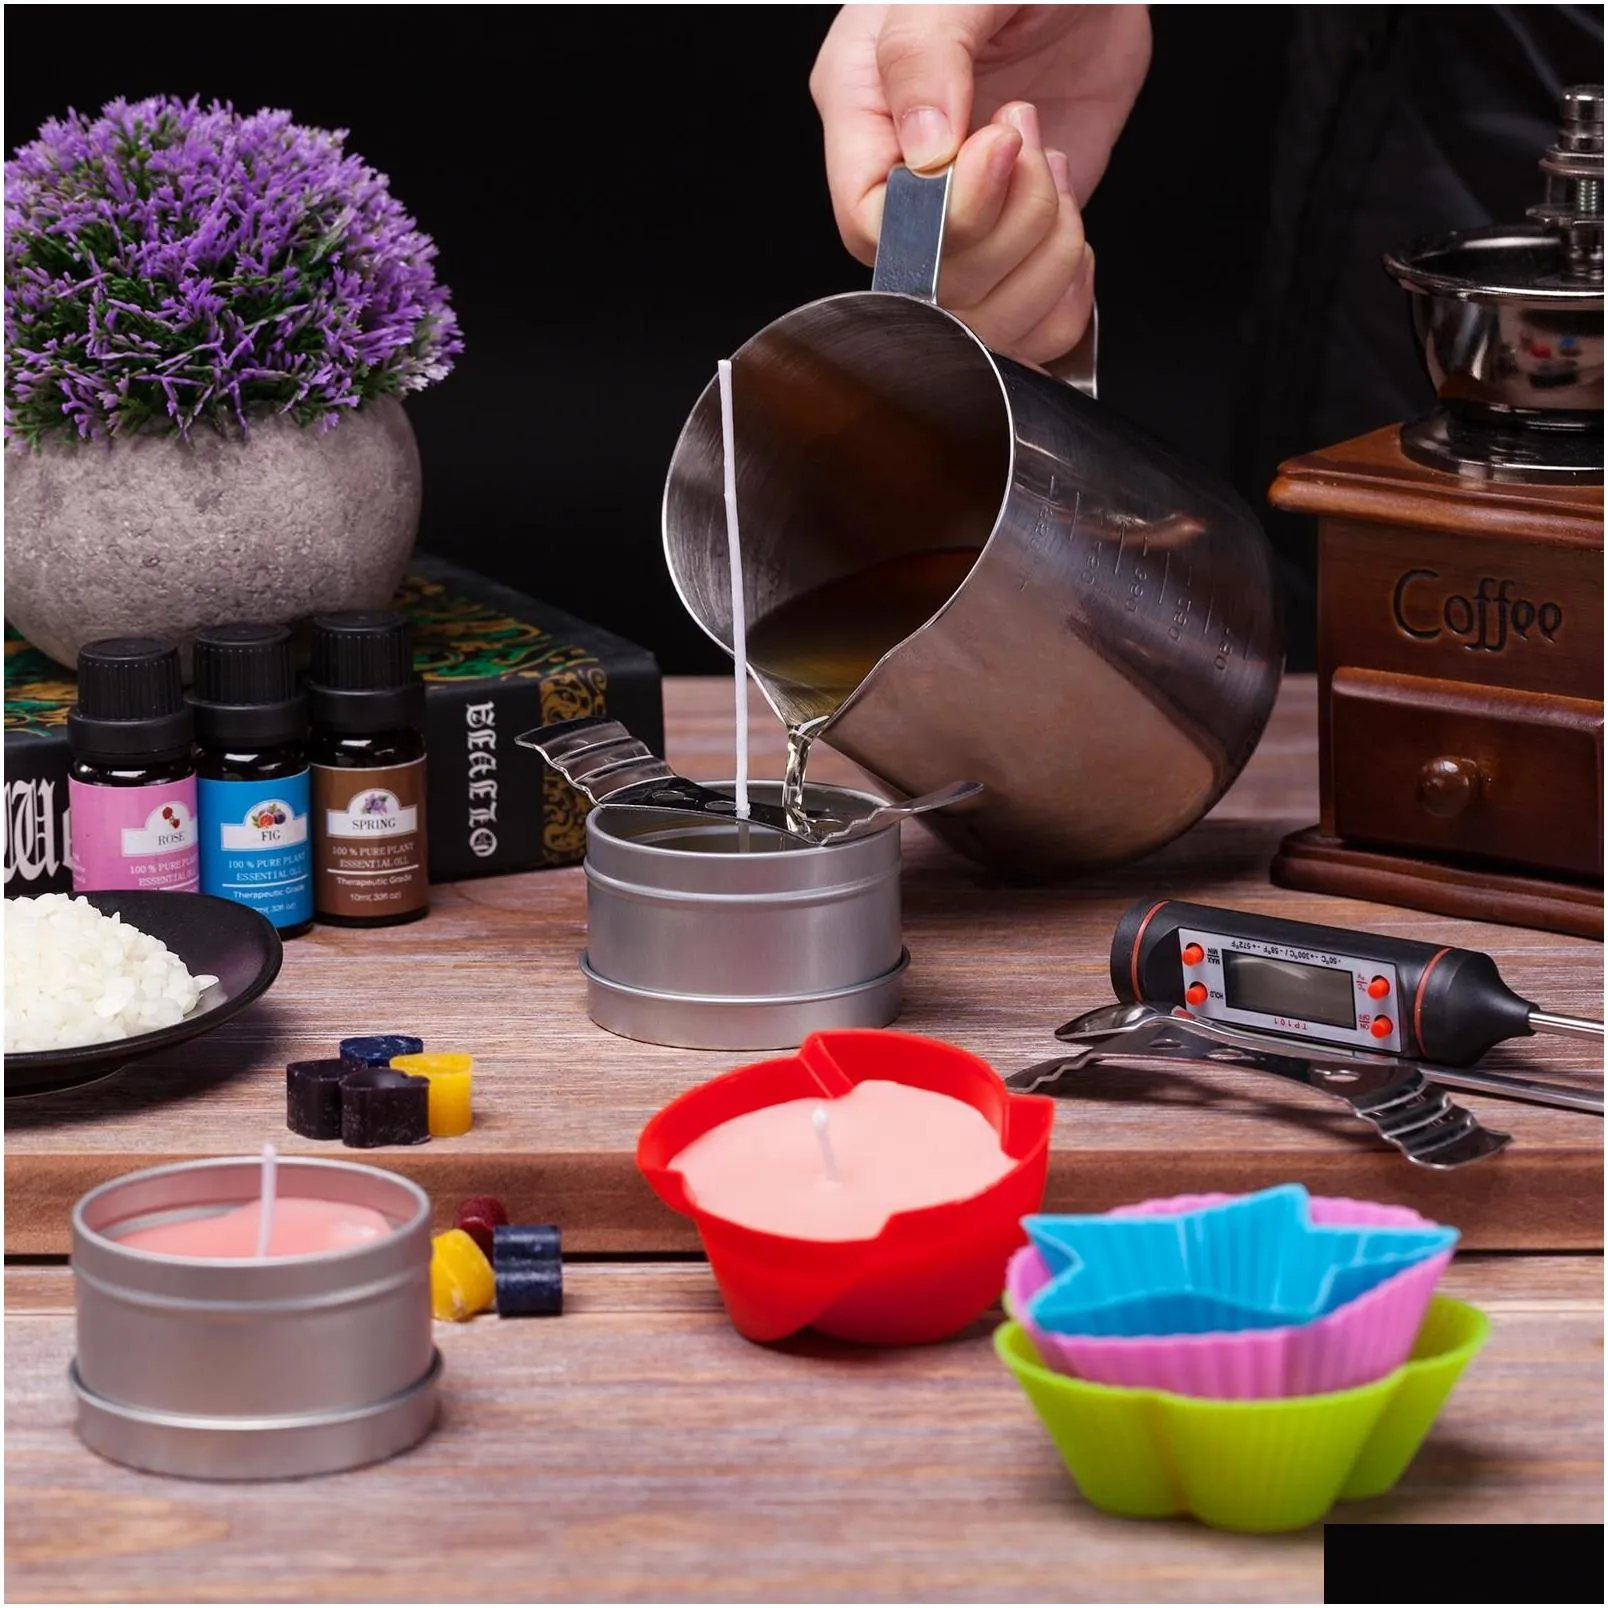 Candles Scented Candles Making Beginners Set Complete Diy Candle Crafting Tool Kit Supplies Beex Melting Pot Fragrance Oil Tins Dyes H Dh7Xa